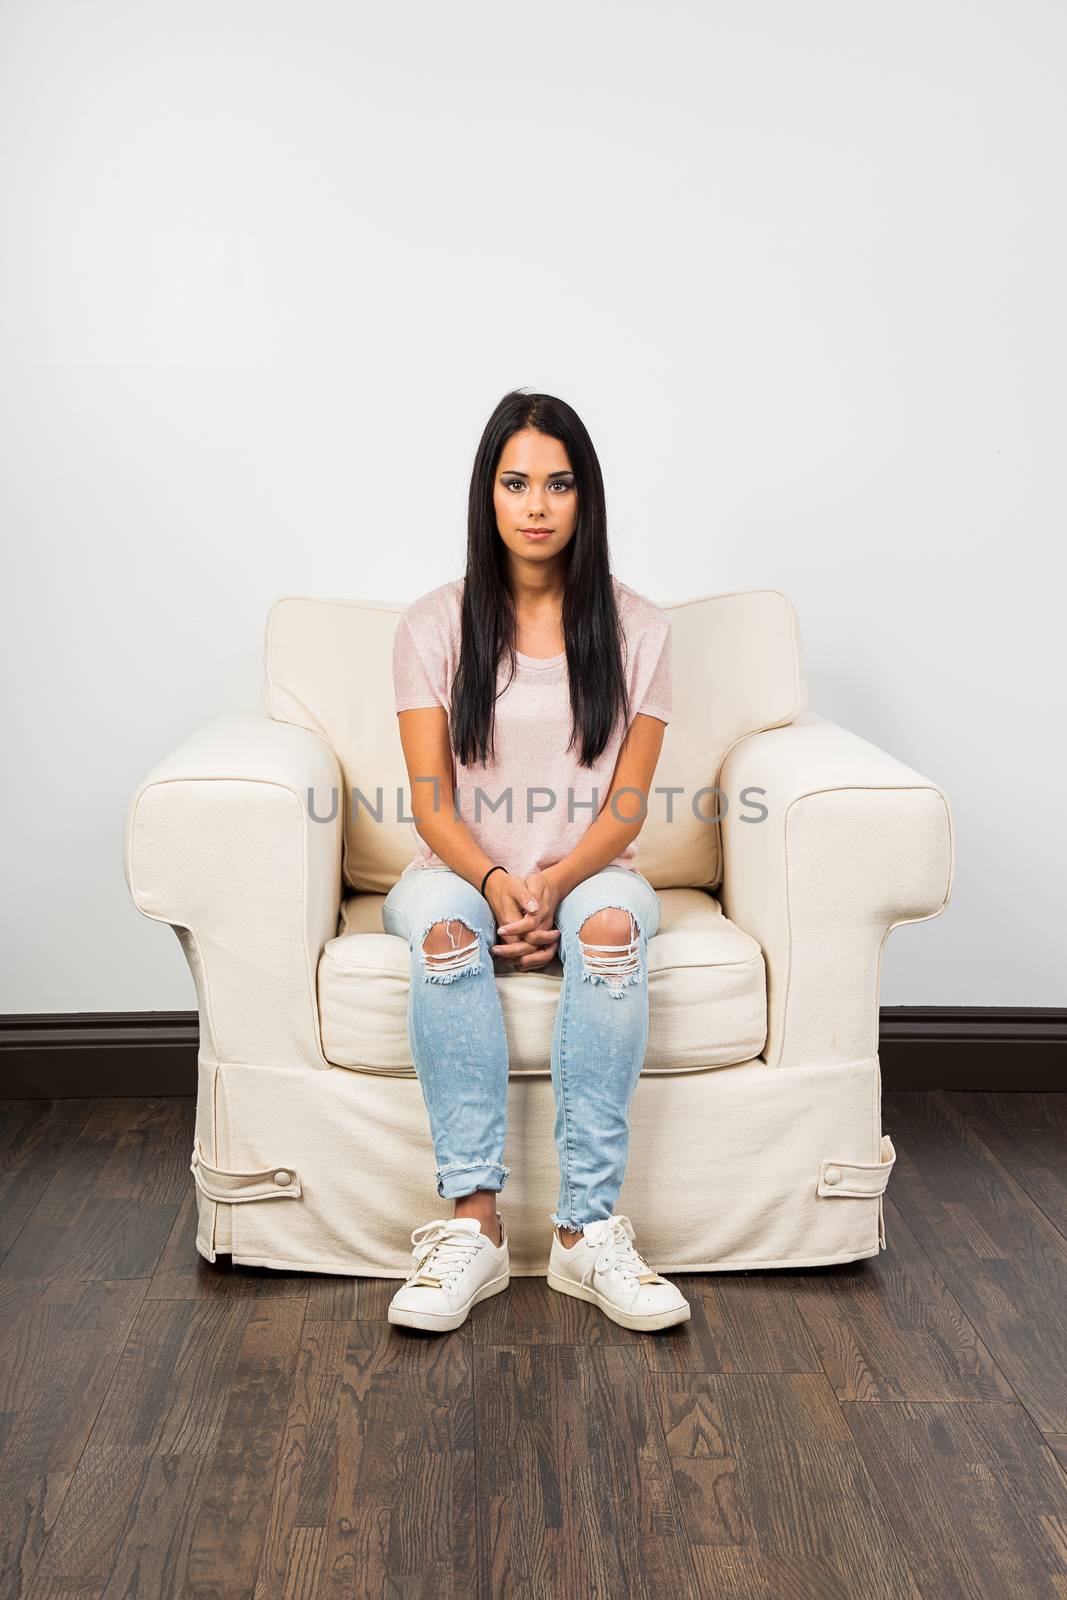 Mid-twenties young woman with long black hair sitting on a couch